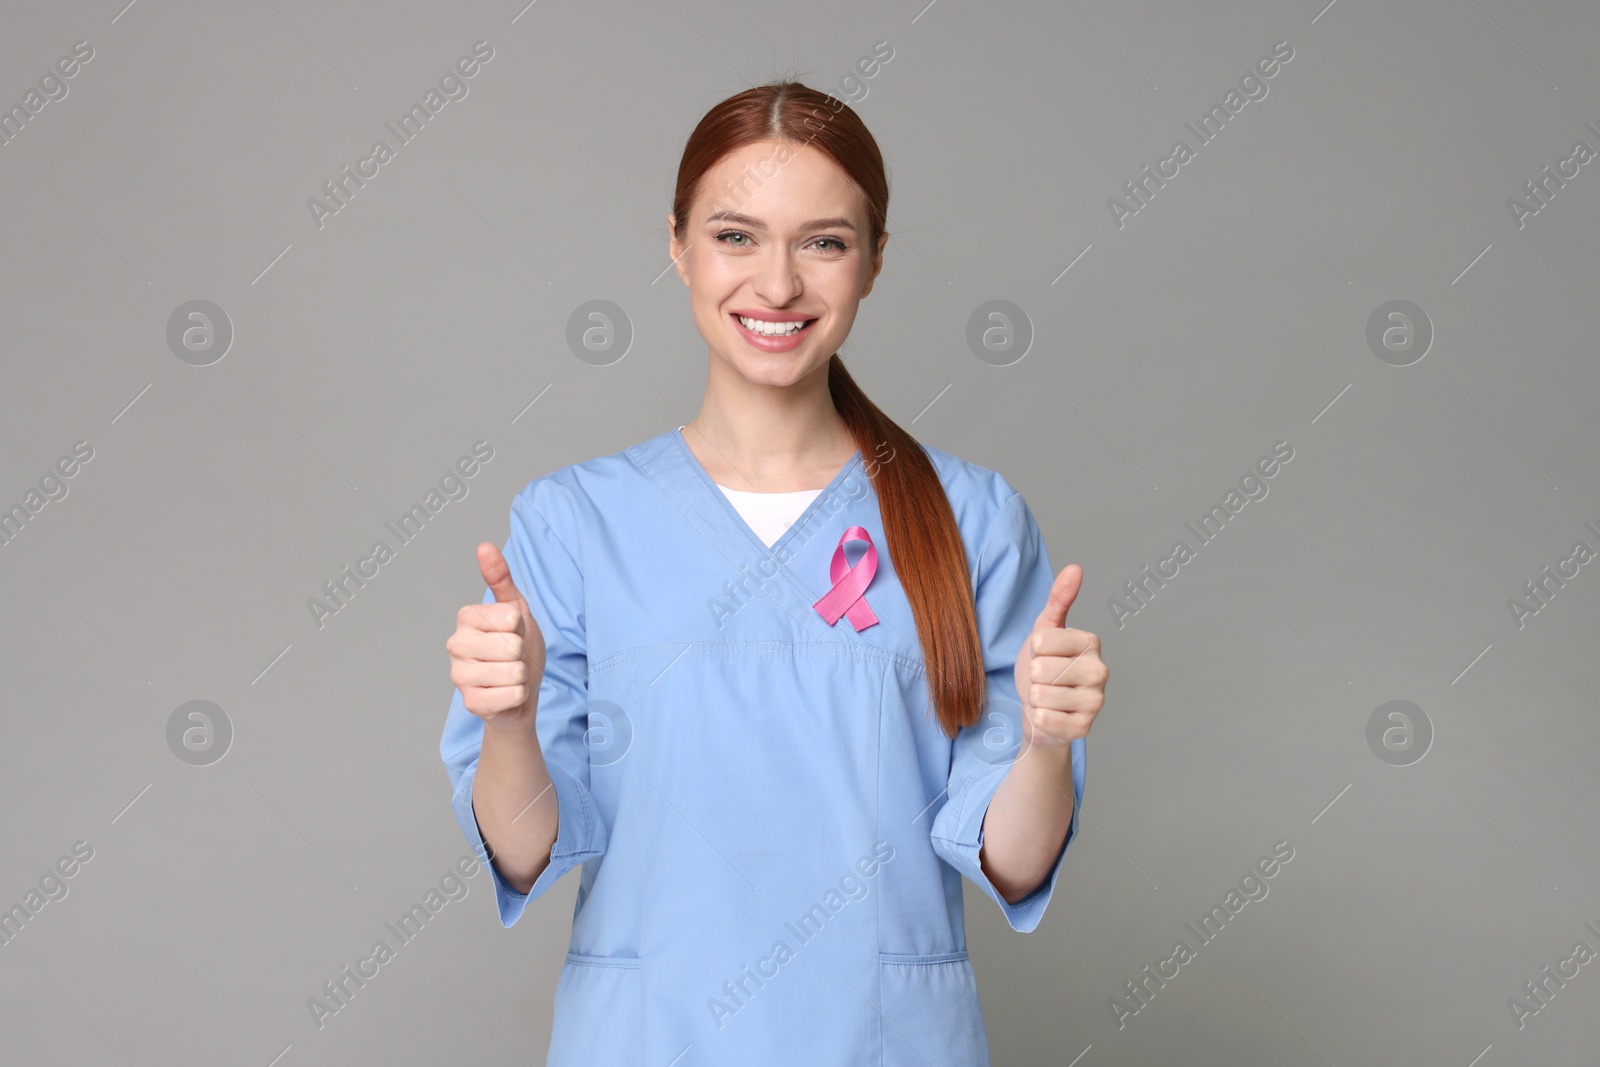 Photo of Mammologist with pink ribbon showing thumbs up on gray background. Breast cancer awareness